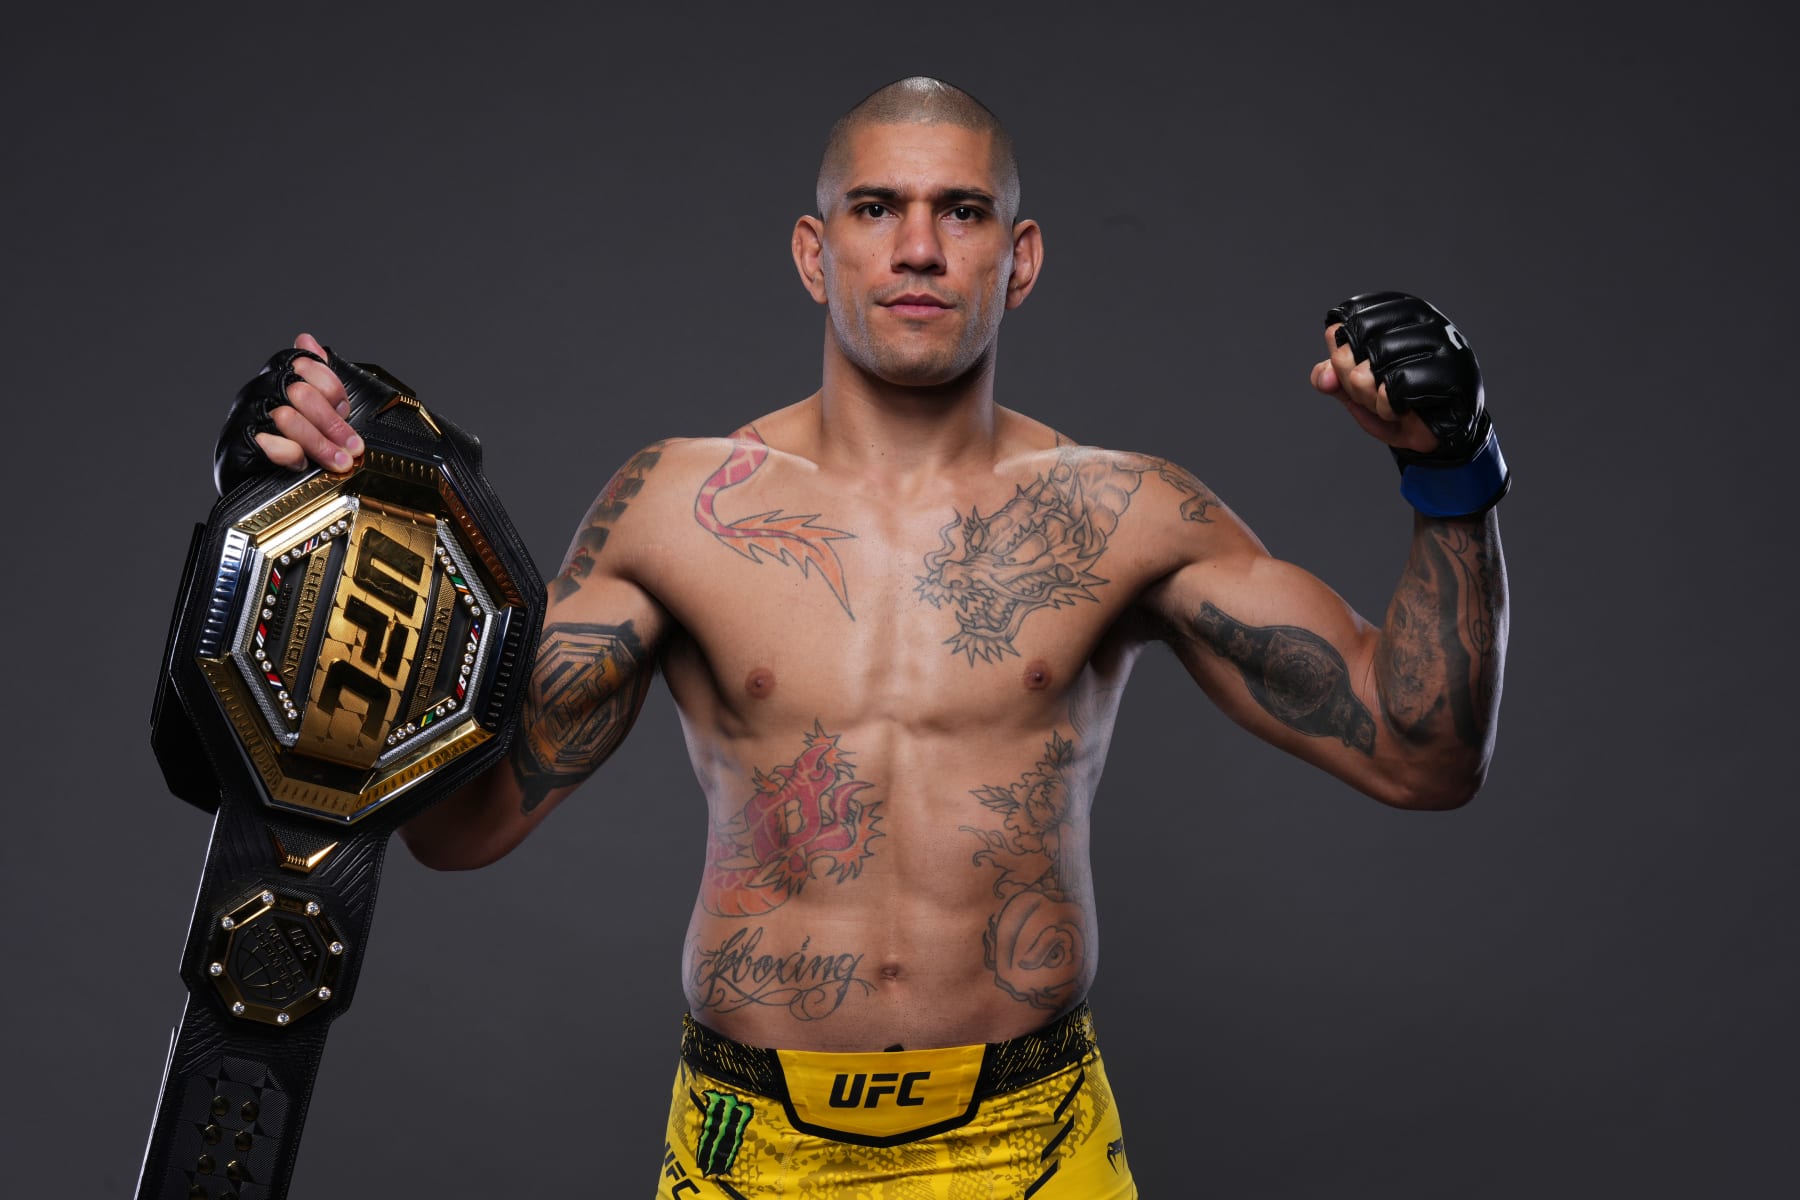 UFC 182 results: Dominant Brad Tavares shuts out fading Nate Marquardt to  win unanimous decision - MMAmania.com